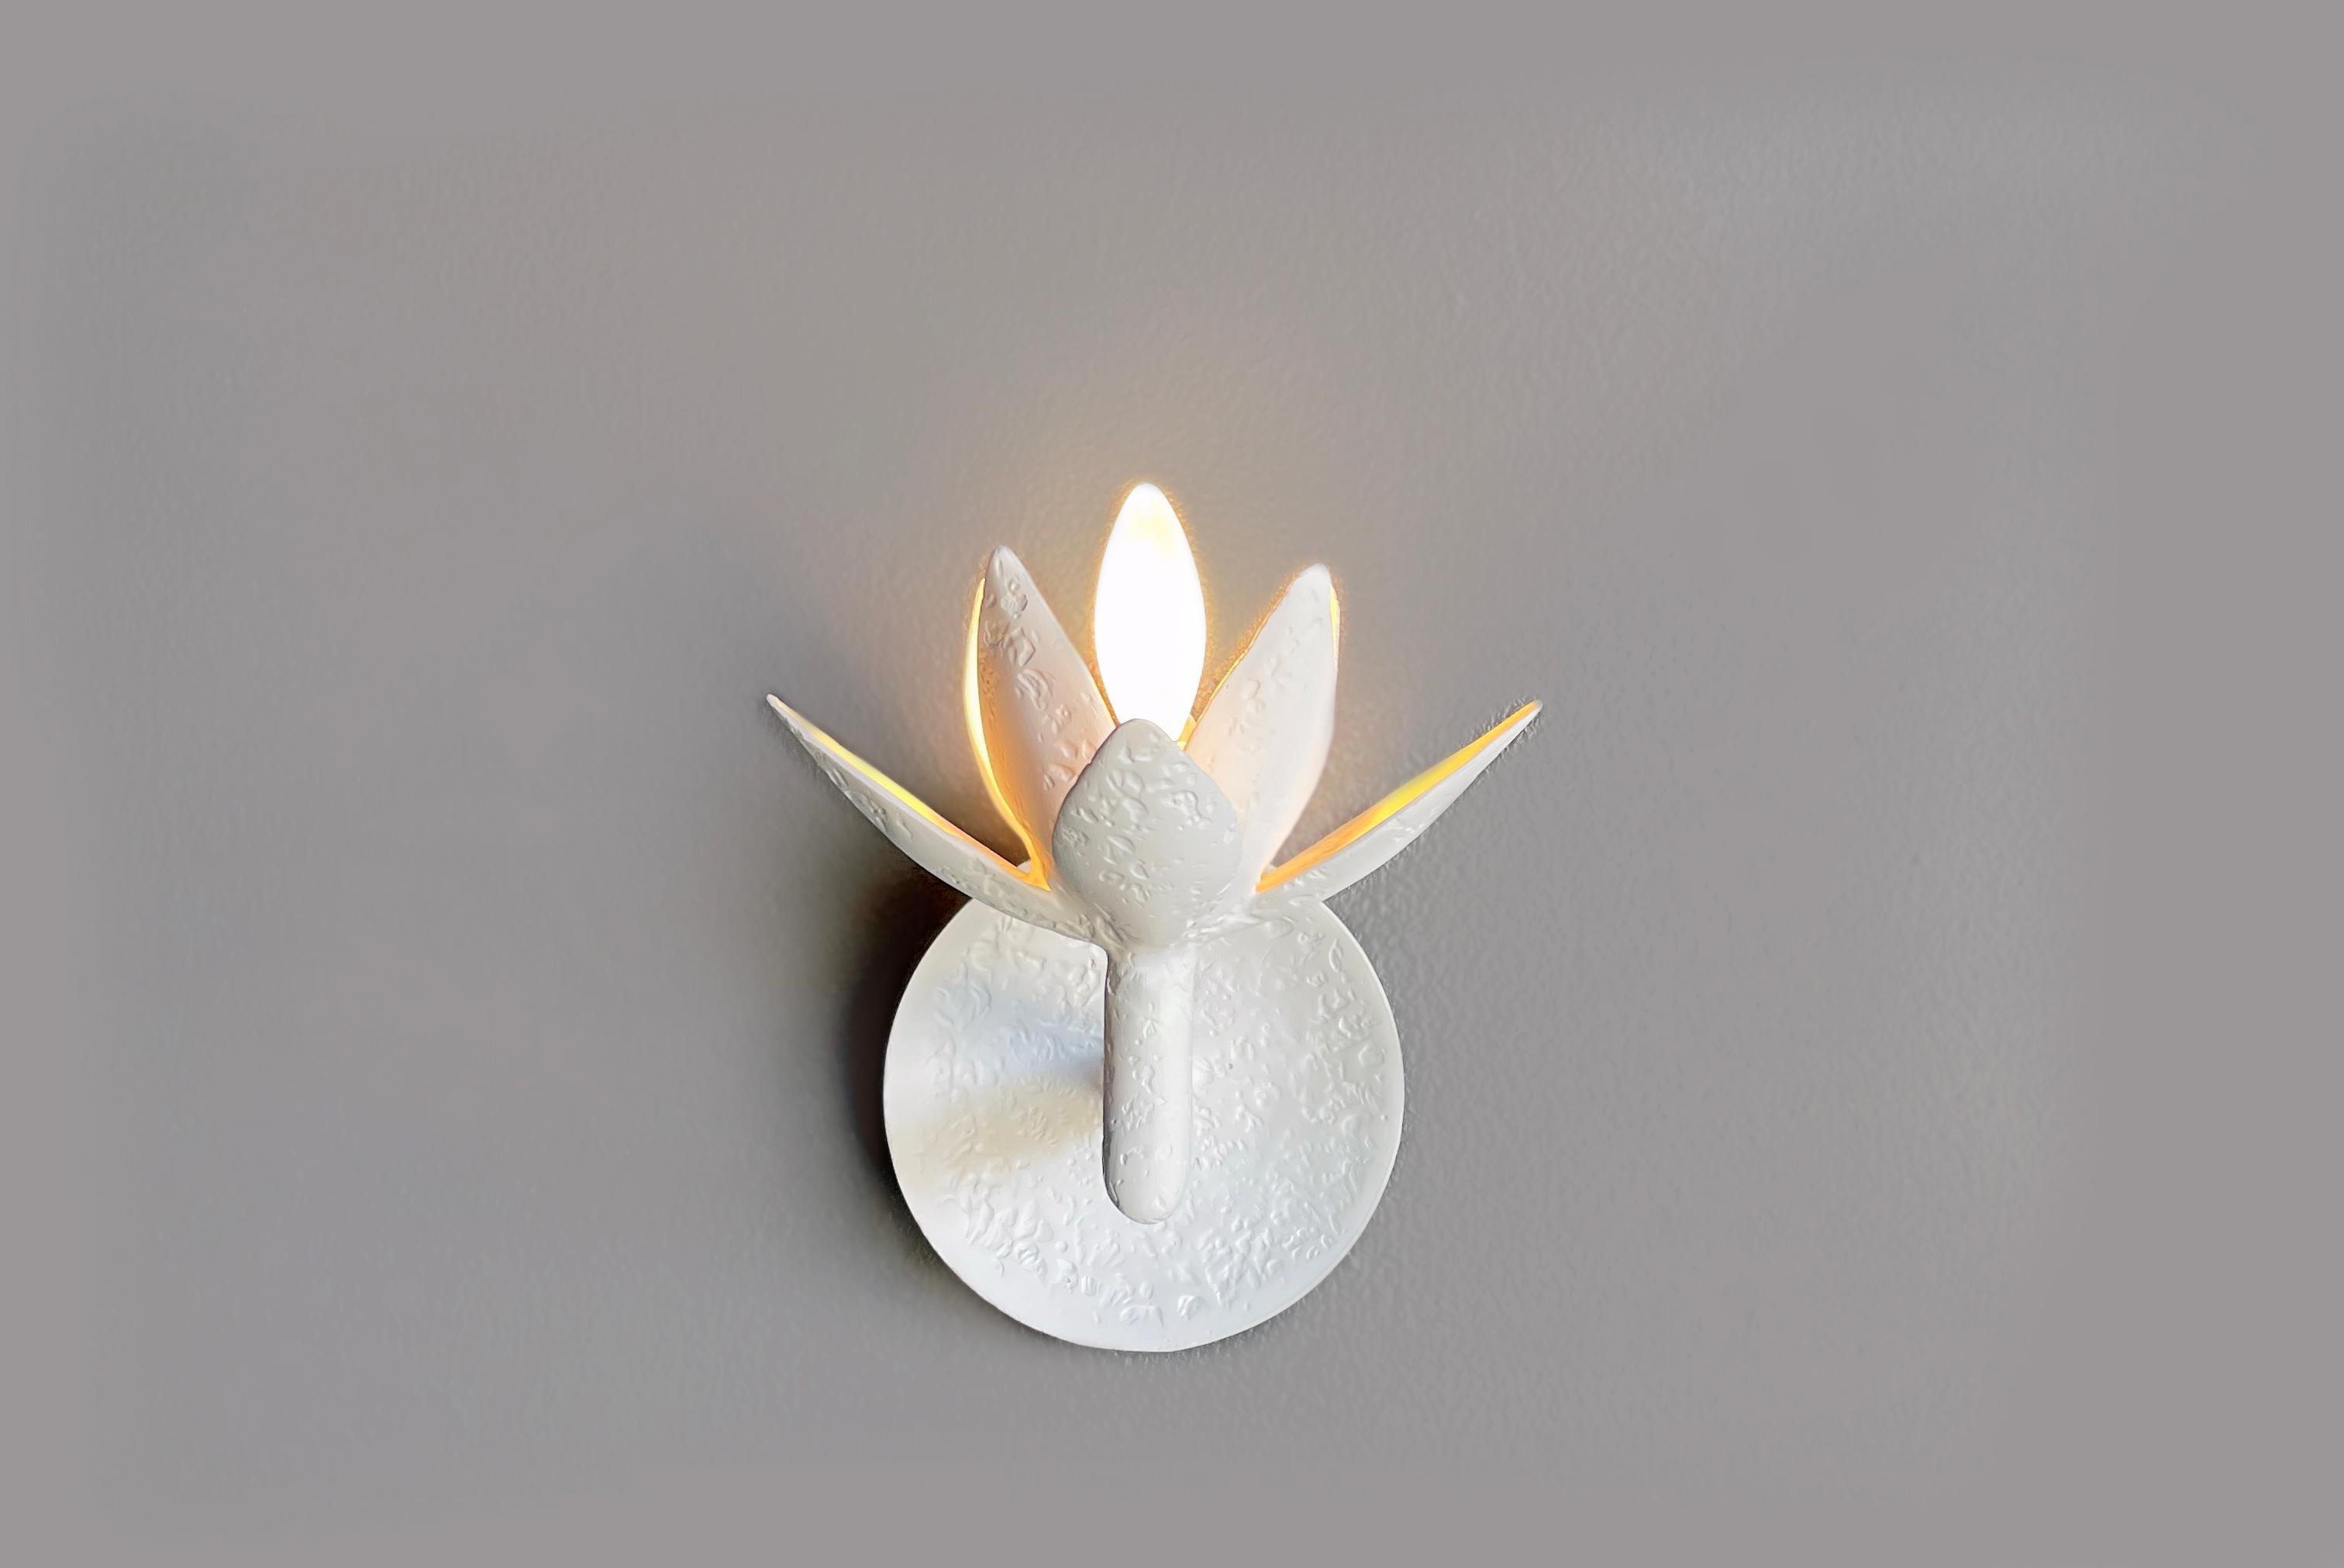 This sconce has our signature plaster of Paris finish and it was designed to complement our Vosges Chandelier. The versatile sconce will accentuate the beauty of your home with an understated complexity. The candelabra based bulb (60 watts Max) in